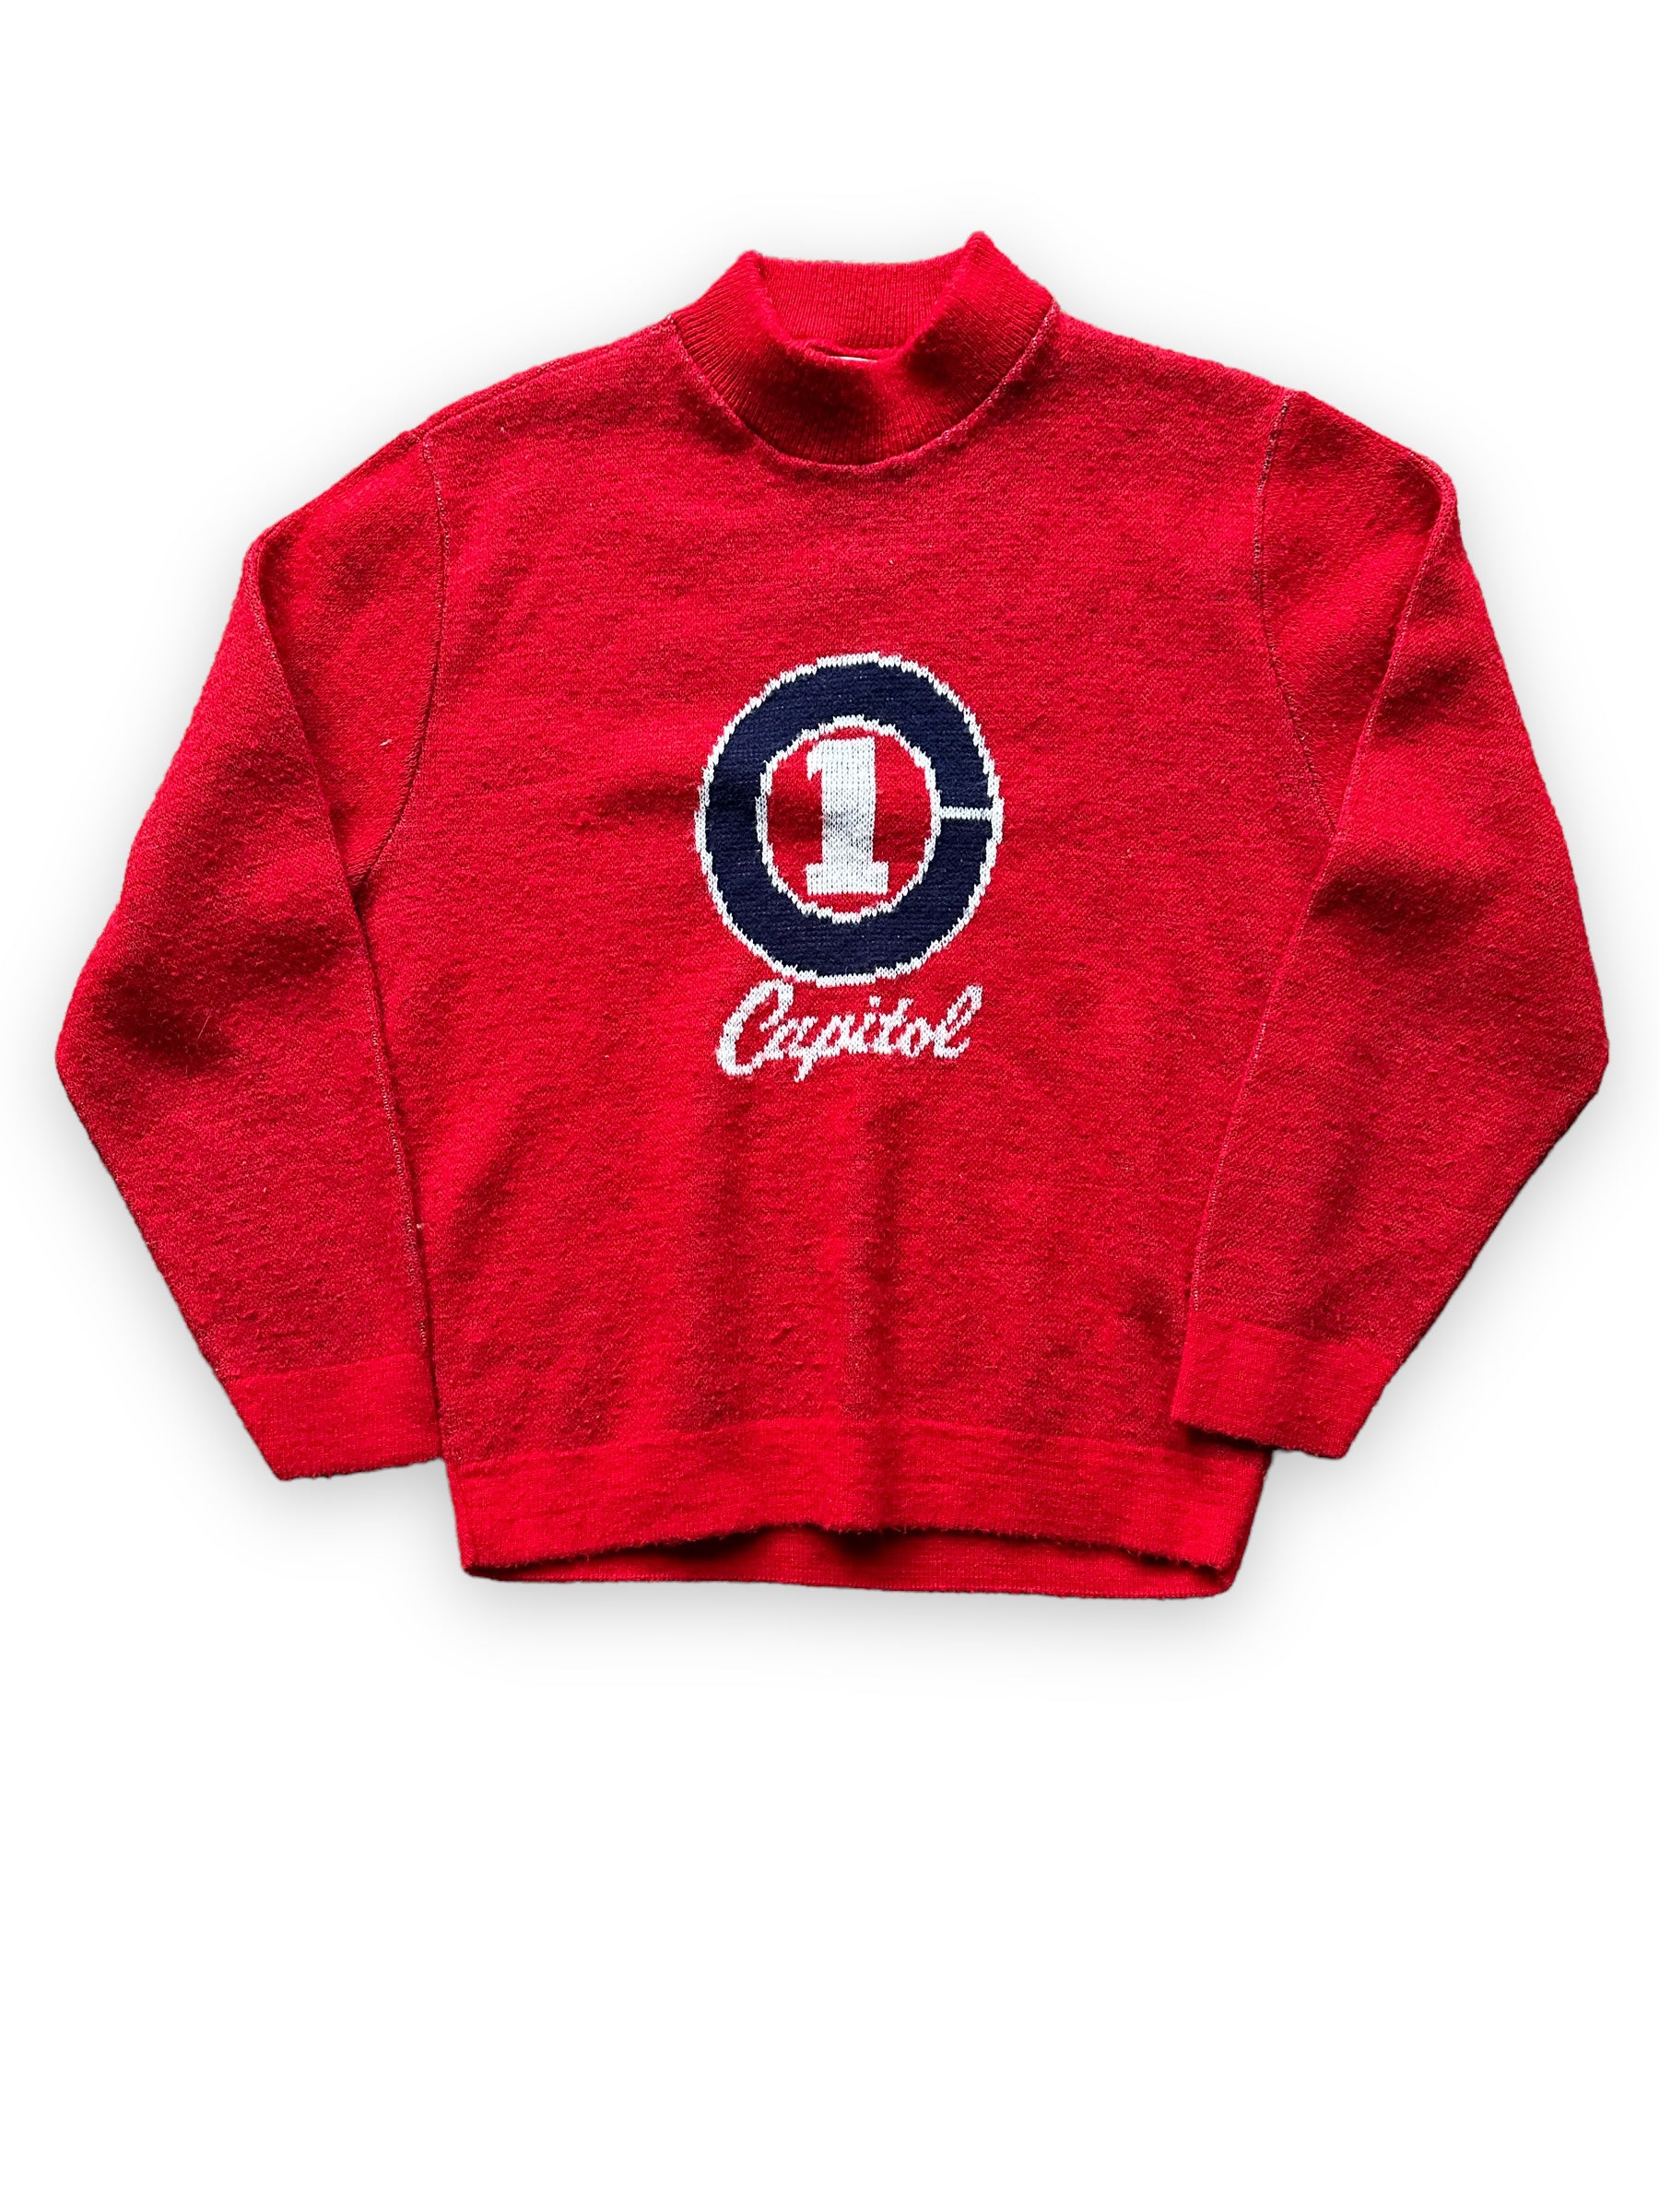 Front View of Vintage Capitol Records Promotional Sweater SZ M |  Vintage Sweaters Seattle | Barn Owl Vintage Seattle